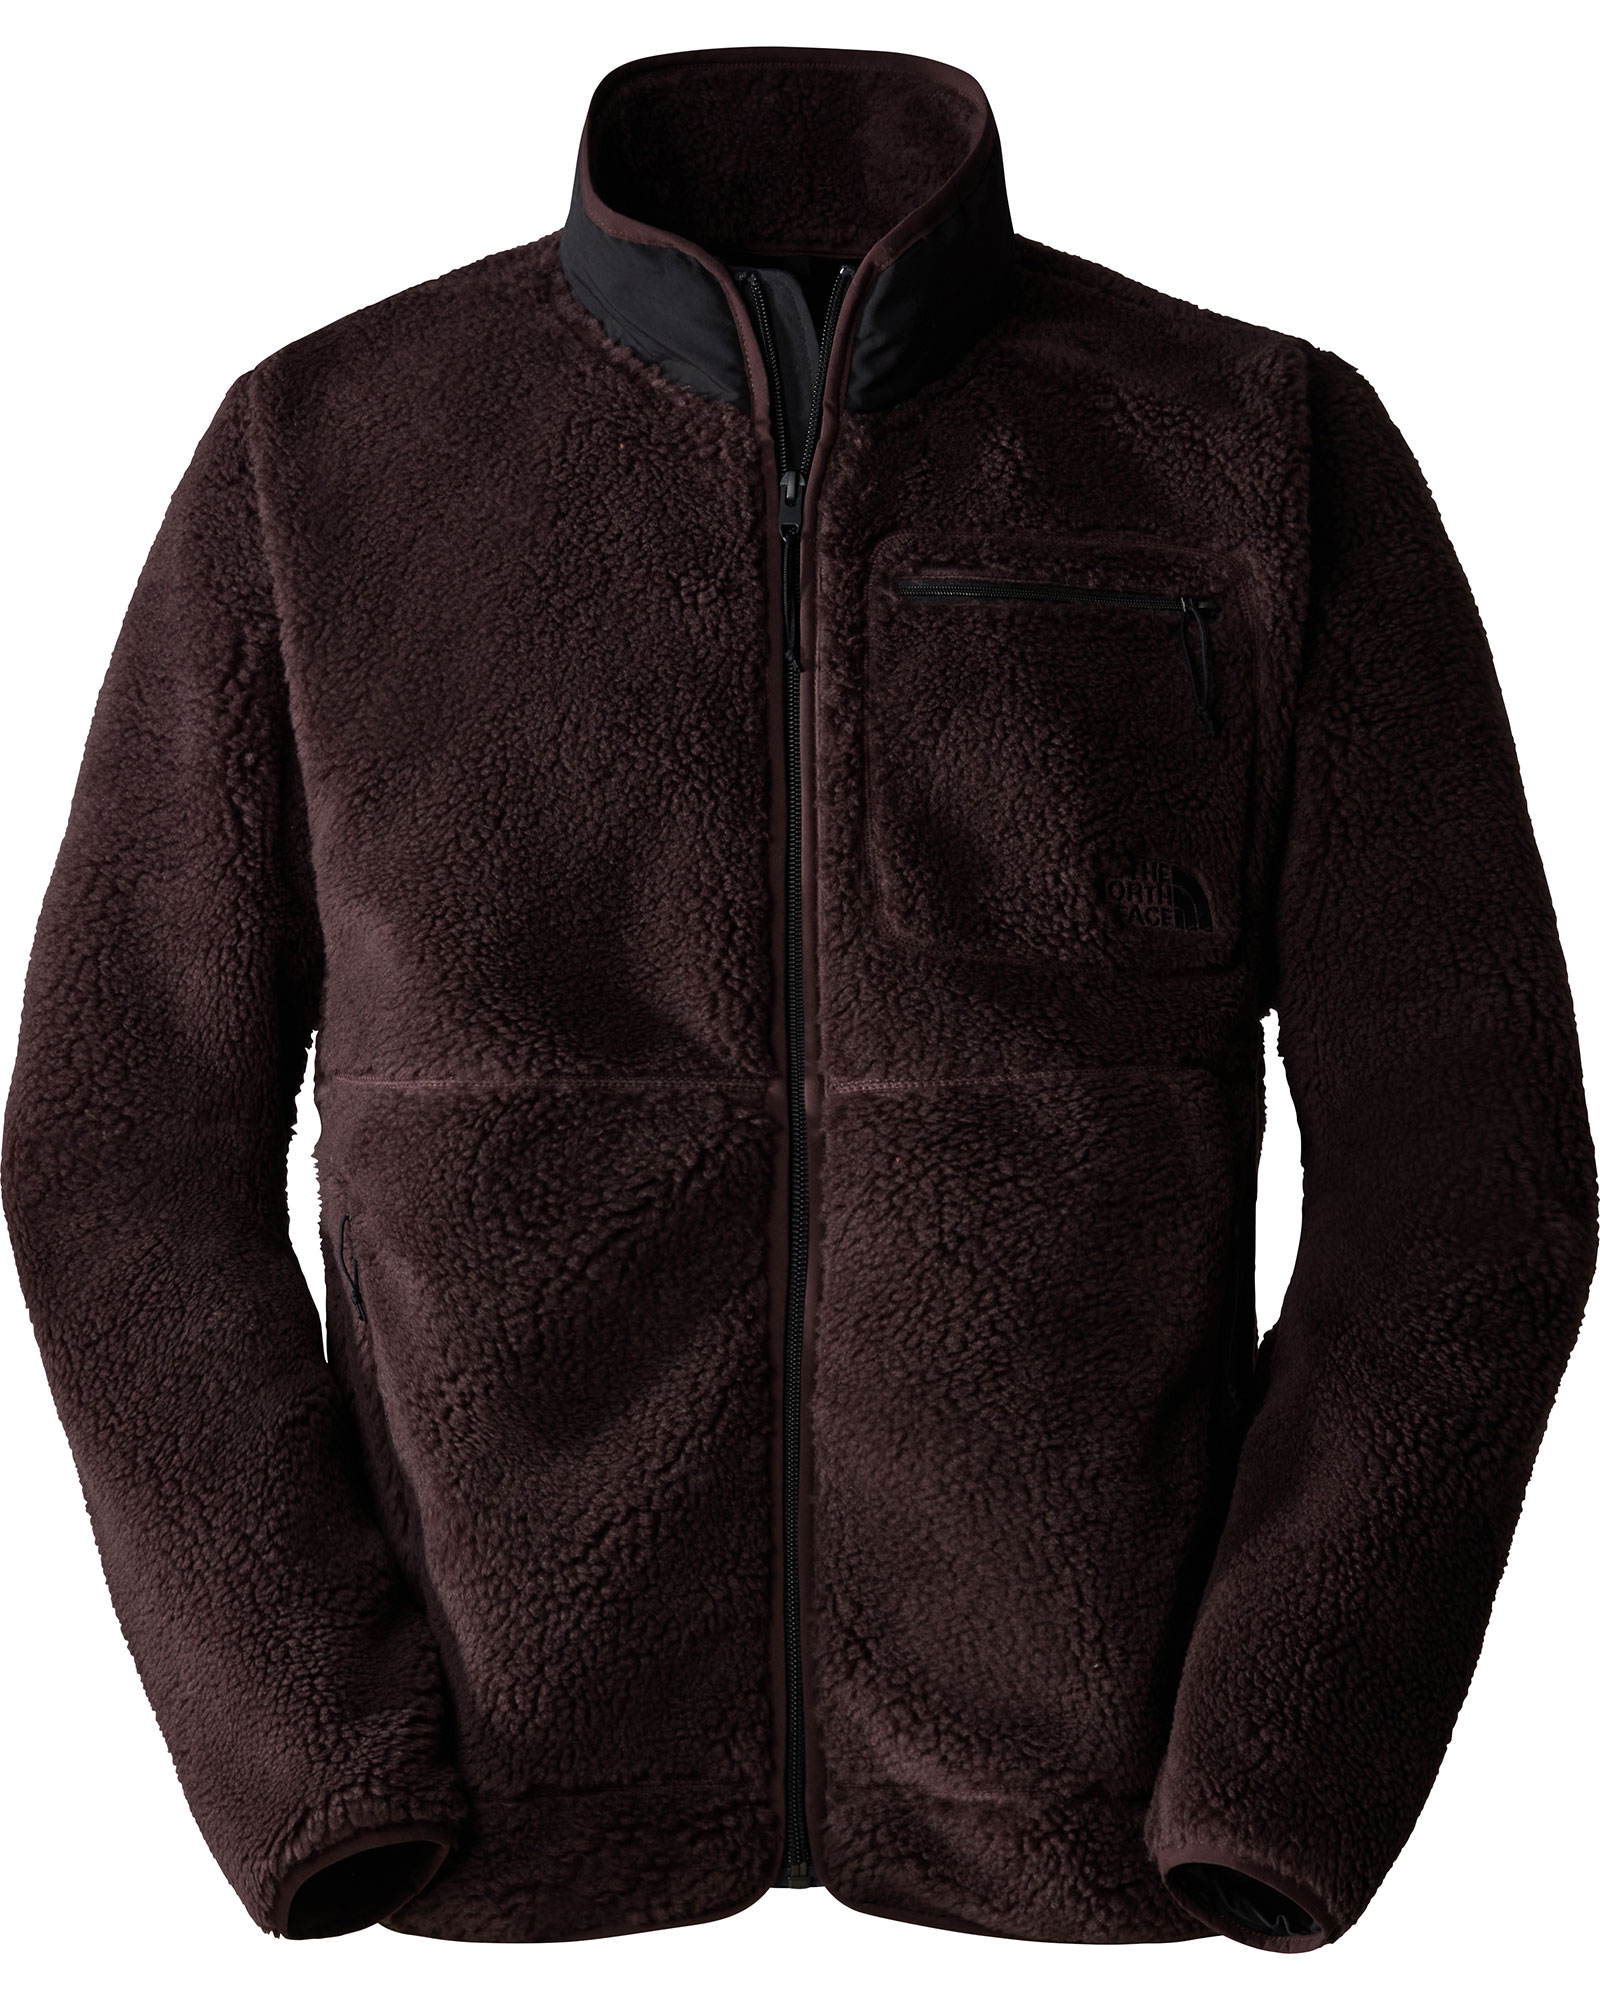 The North Face Men’s Extreme Pile Full Zip Jacket - Coal Brown M